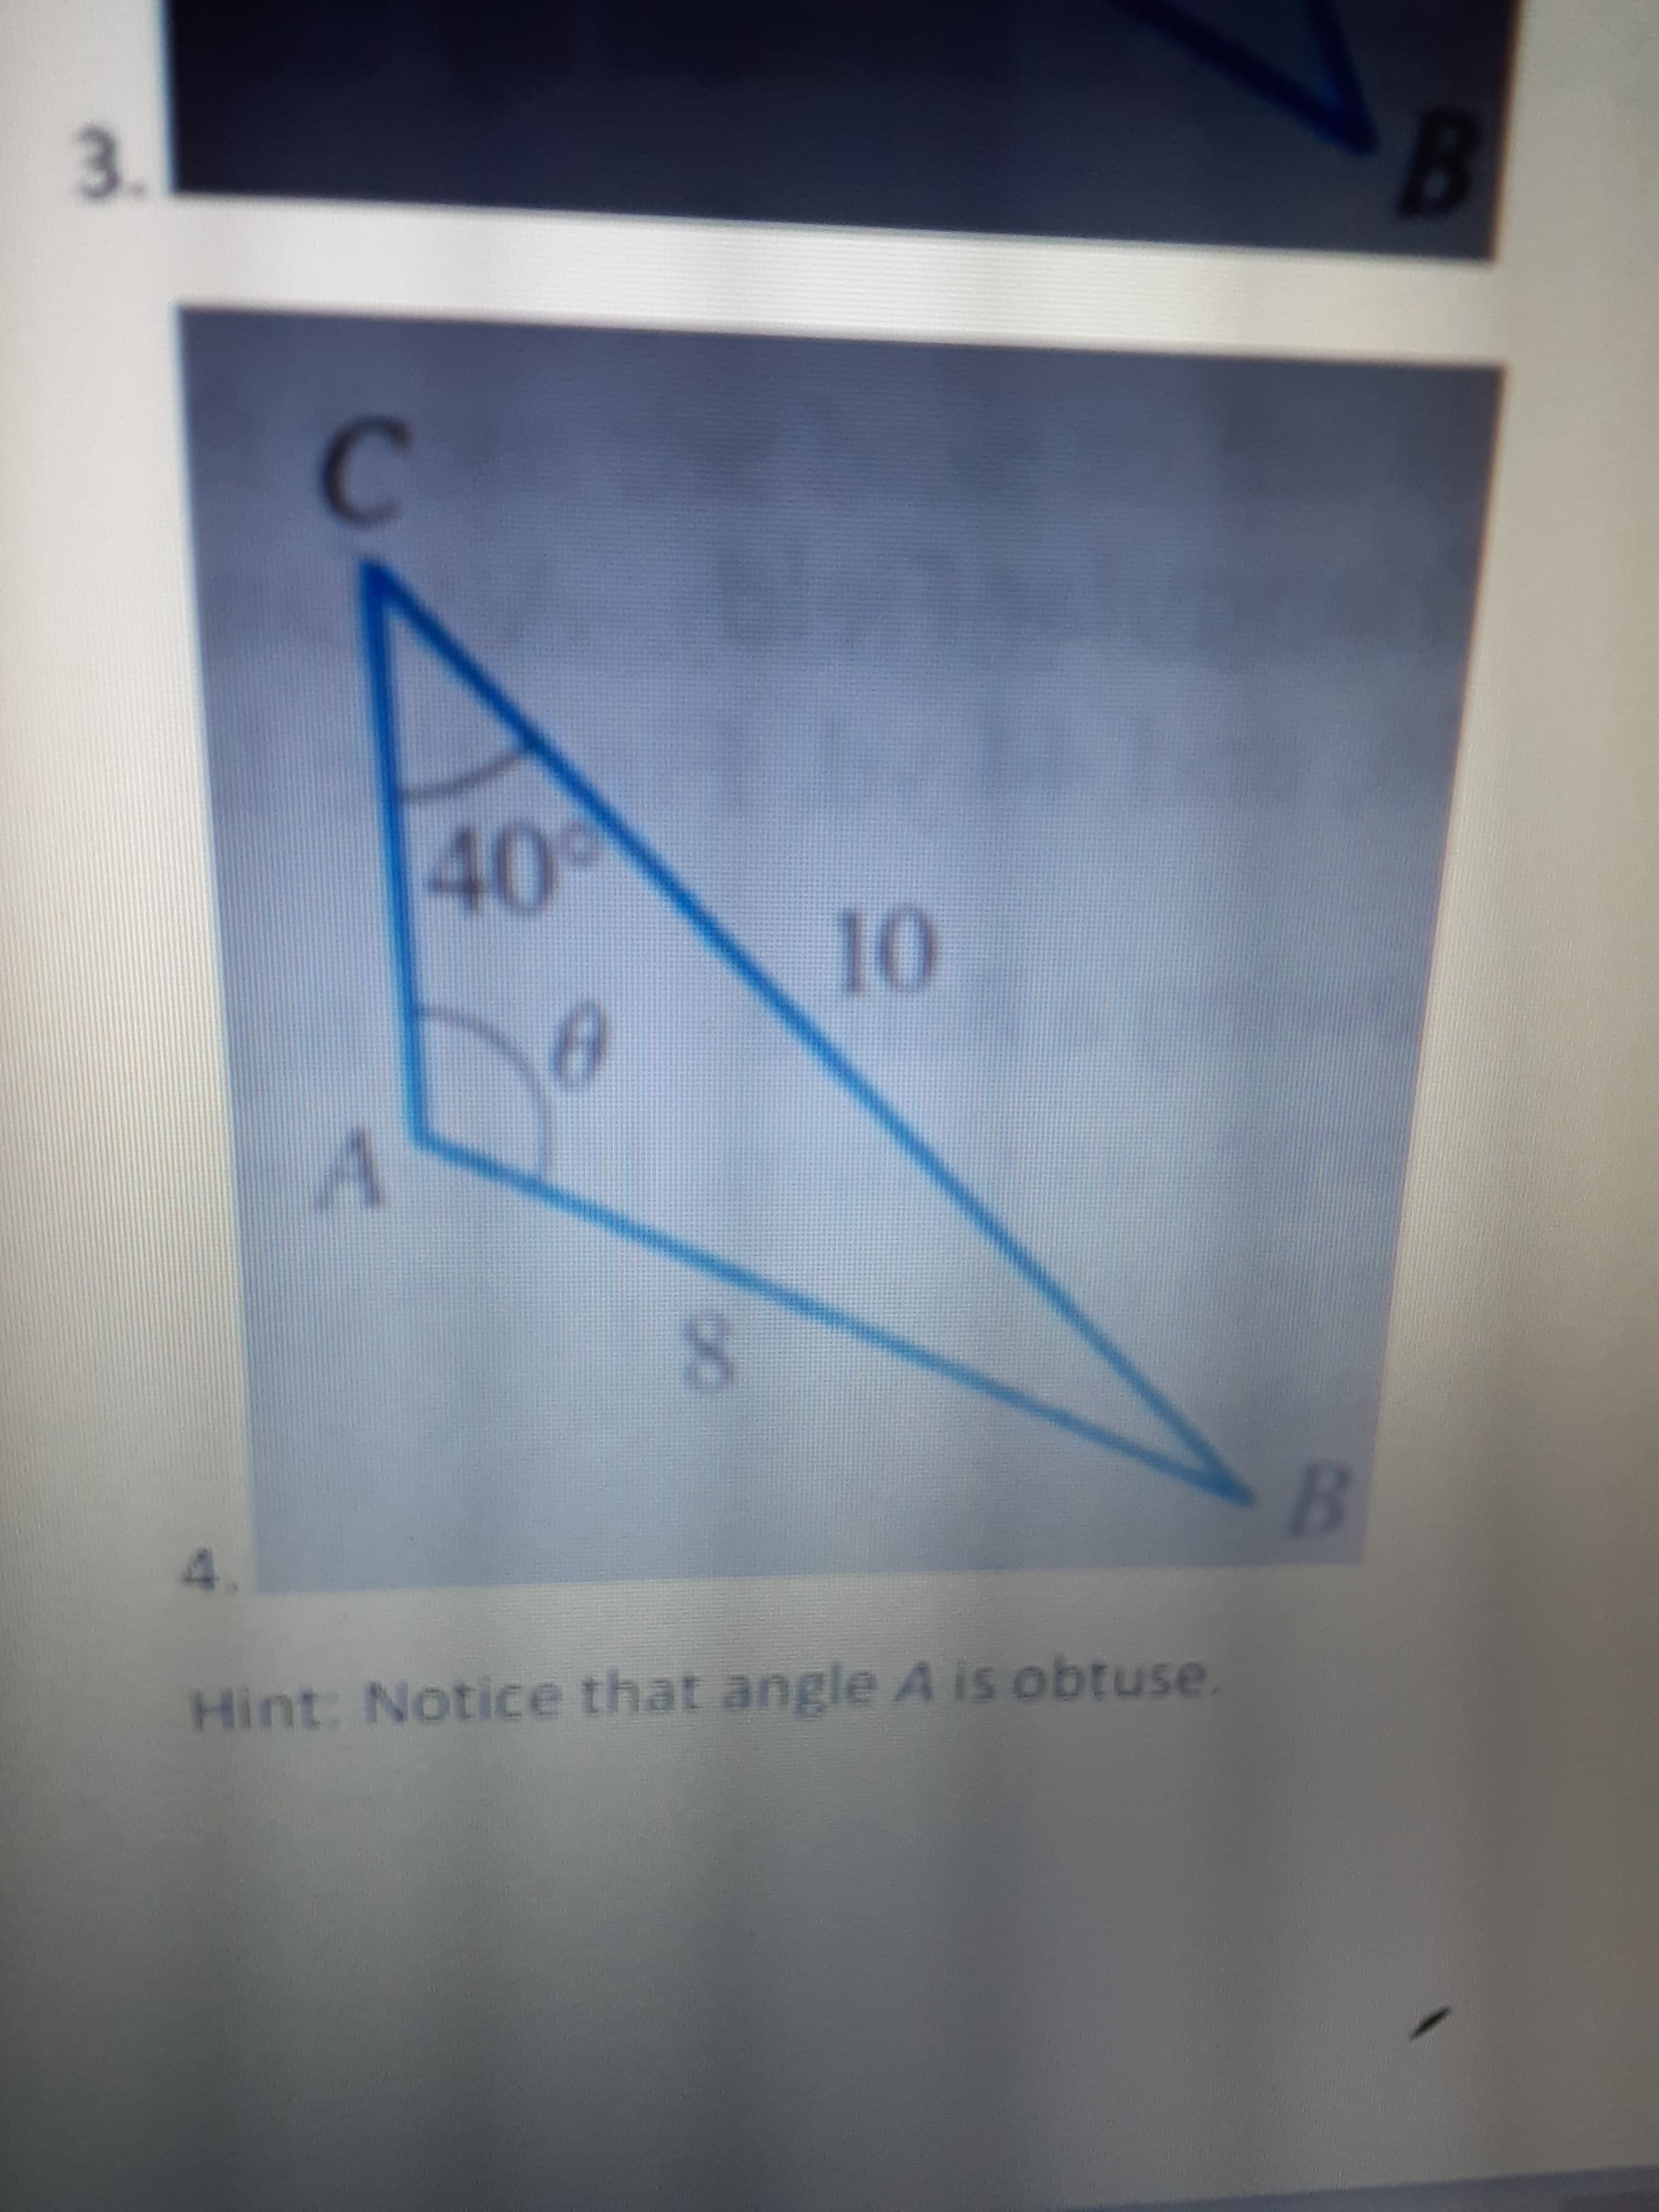 C
40
8.
int: Notice that angle A is obtuse
10
